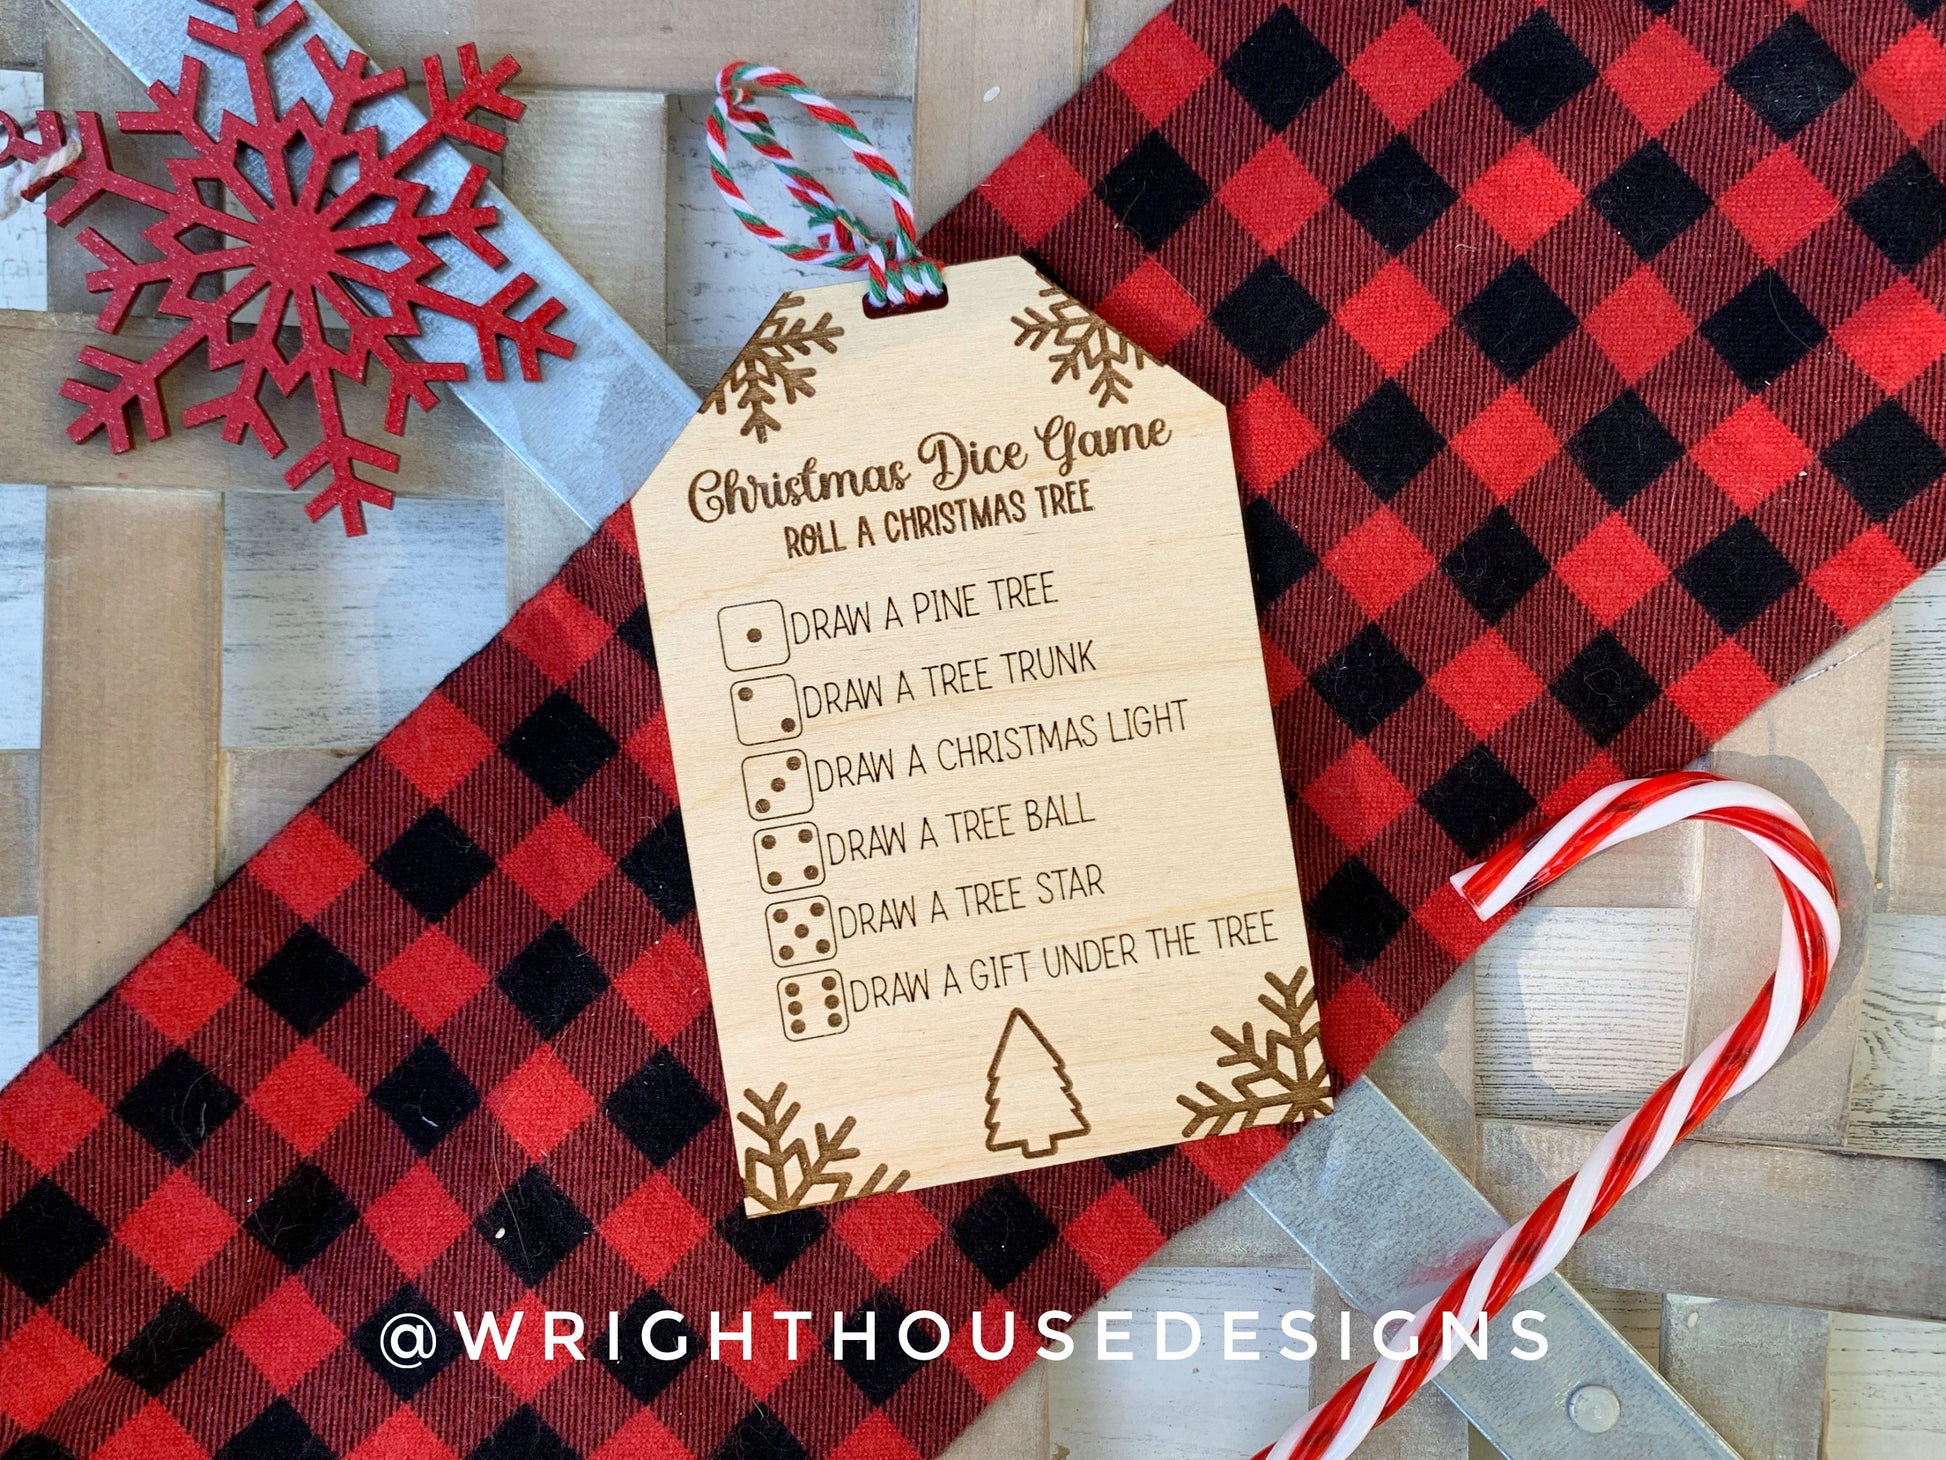 Holiday Dice Game Tags - Gift Exchange Game - Christmas Eve Box - Stocking Stuffers - Secret Santa Gift - Office Party - Family Game Night